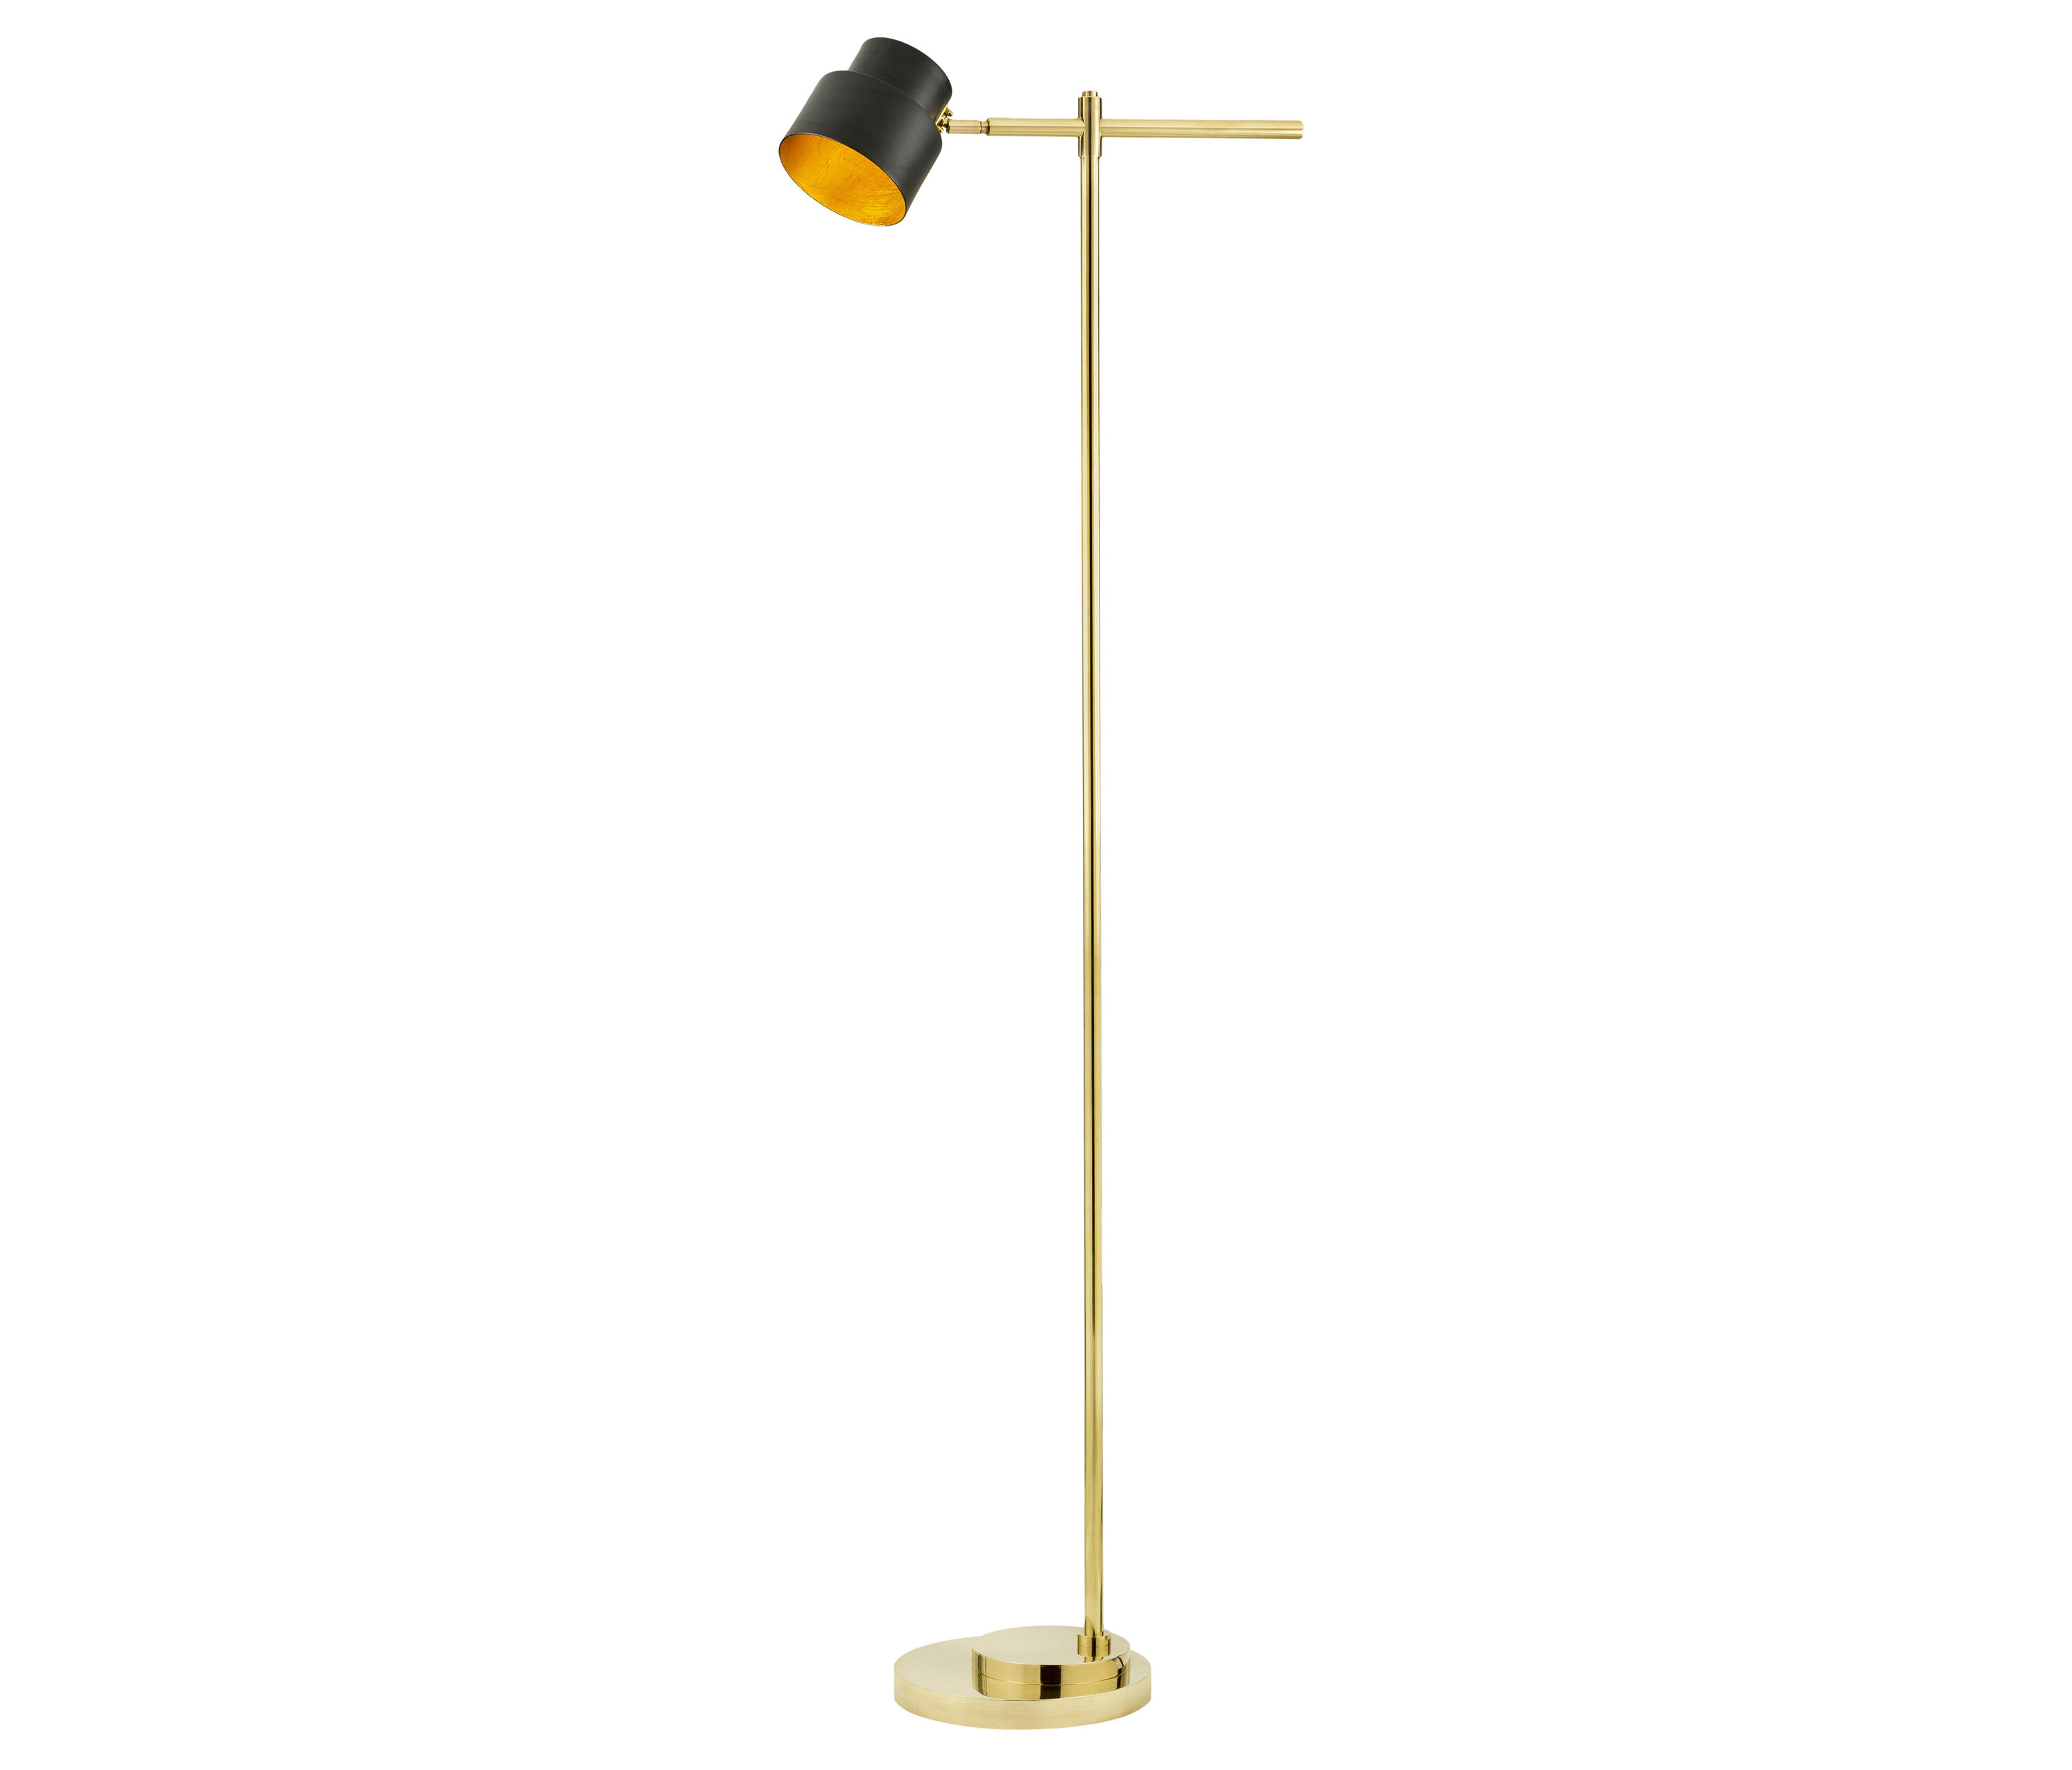 Satellite Industrial Chic Floor Lamp Hight 163 Cm Architonic for size 3000 X 2563